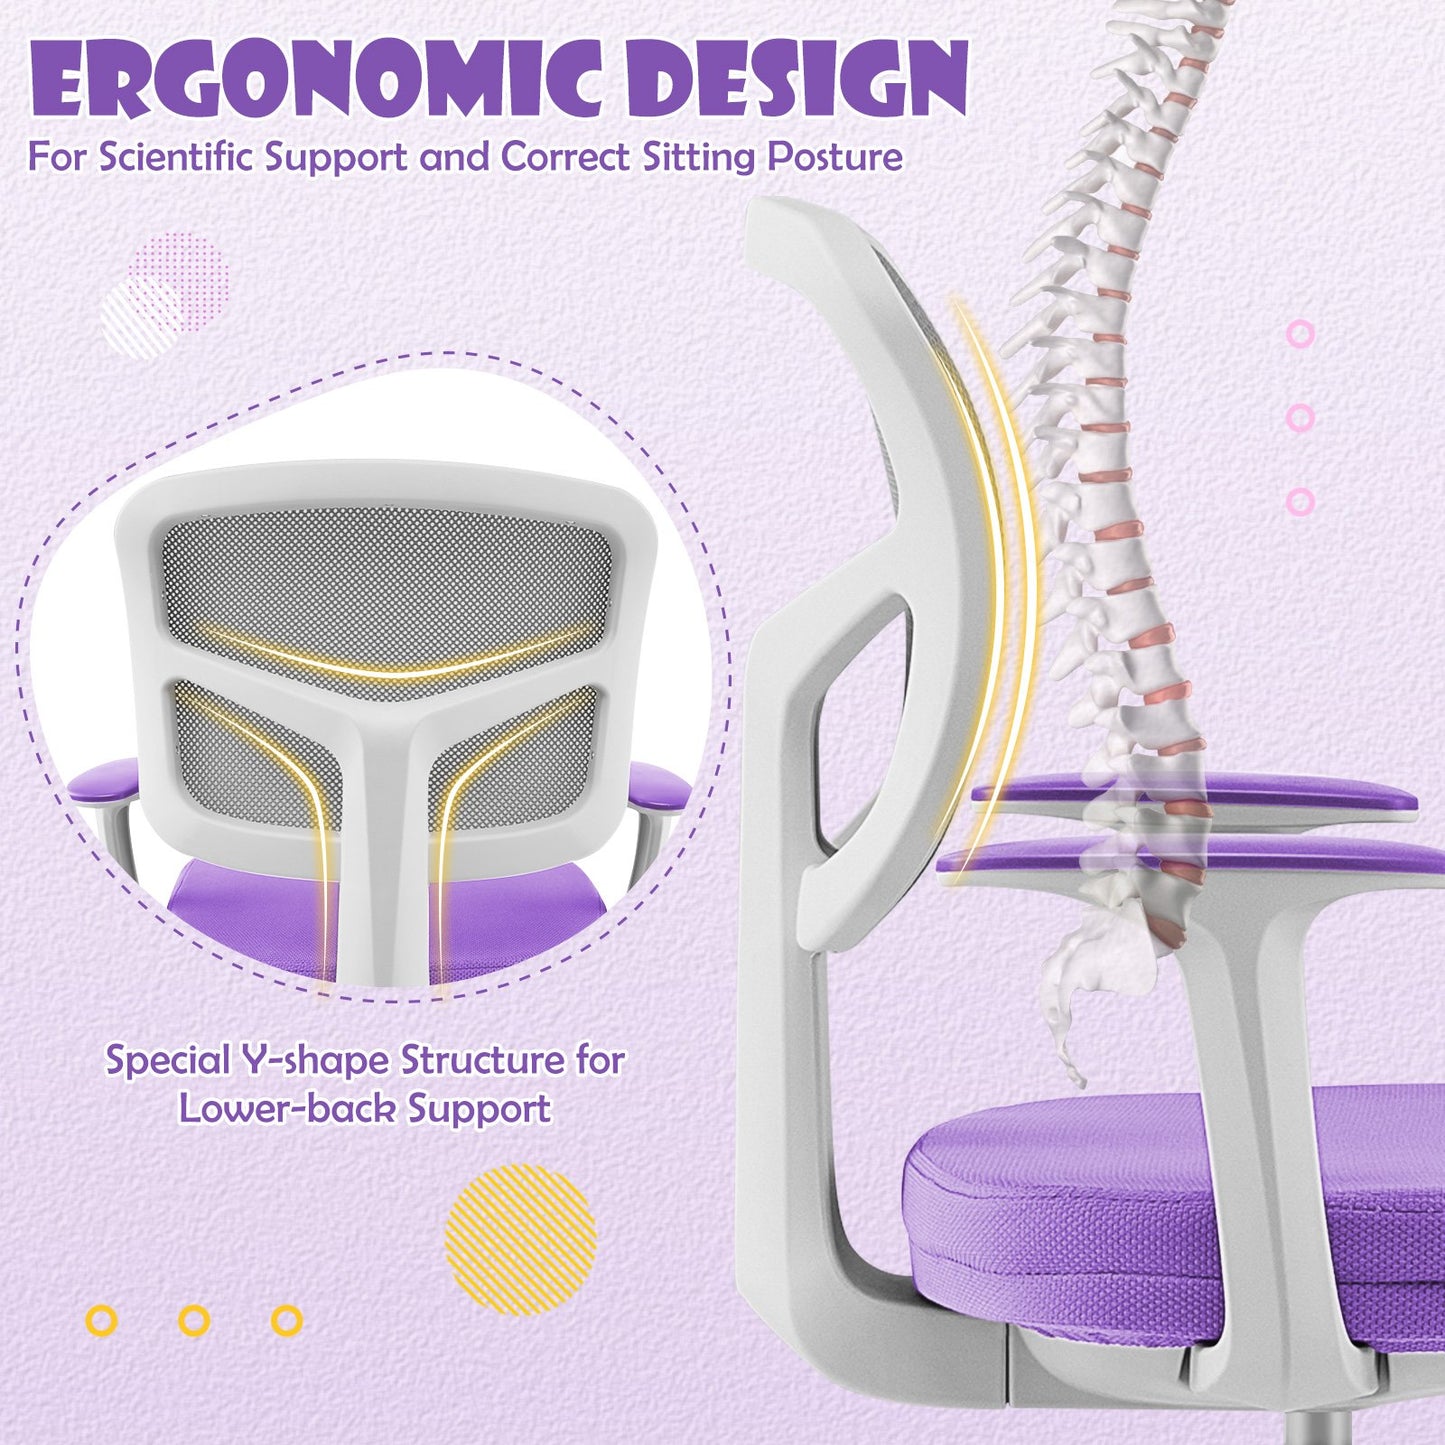 Adjustable Desk Chair with Auto Brake Casters for Kids, Purple - Gallery Canada